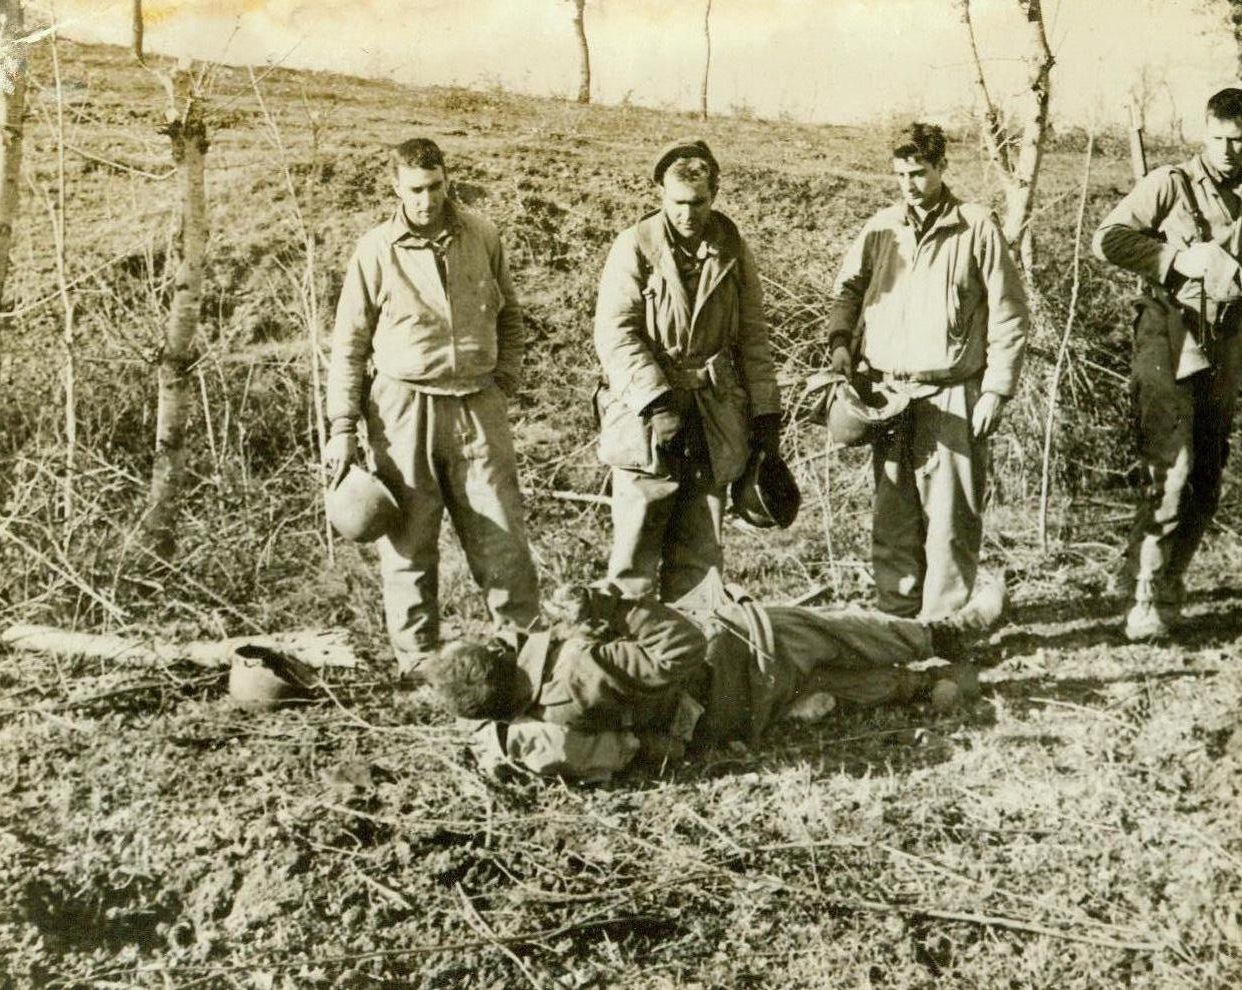 DEATH STRIKES THEIR BUDDY, 1/19/1944. ITALY – Fellow American soldiers doff their helmets before the dead body of an American engineer who was killed while removing a land mine. Note the hole in left foreground. He had been clearing a path through a mine field so that others could advance in safety. It exploded while he was working on it. Credit Line (ACME);